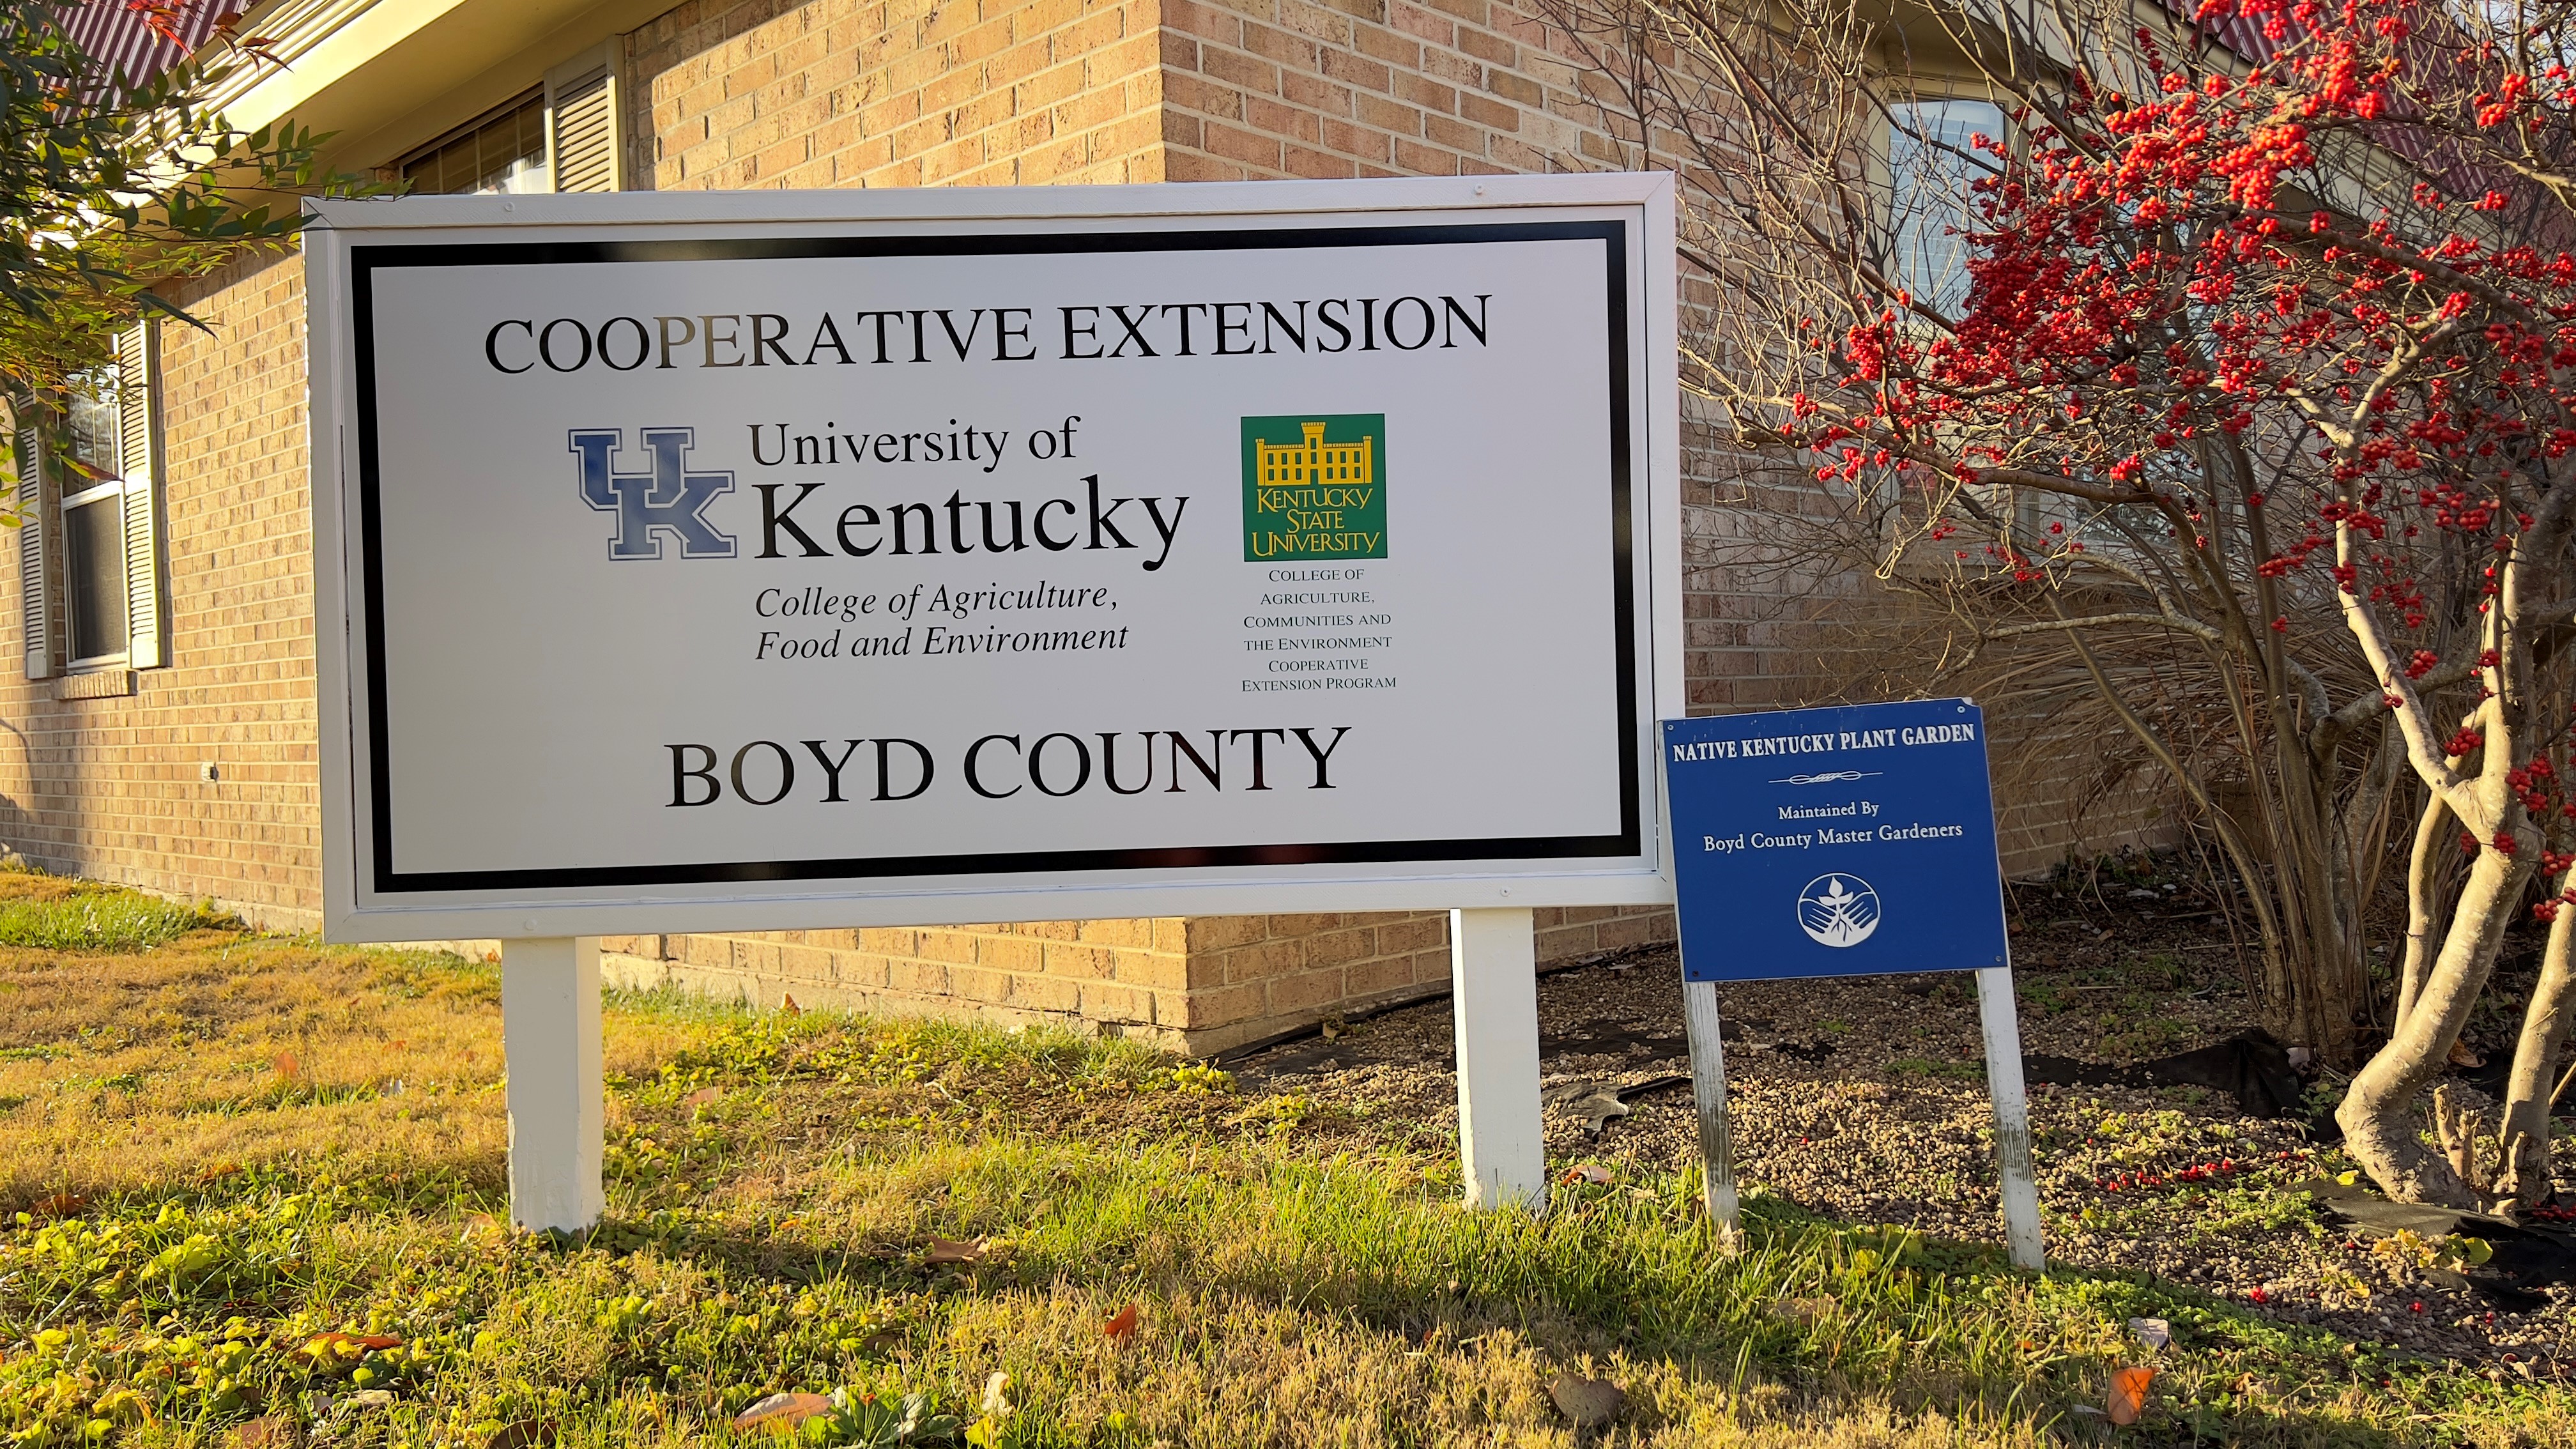 Exterior sign for the Boyd County CES